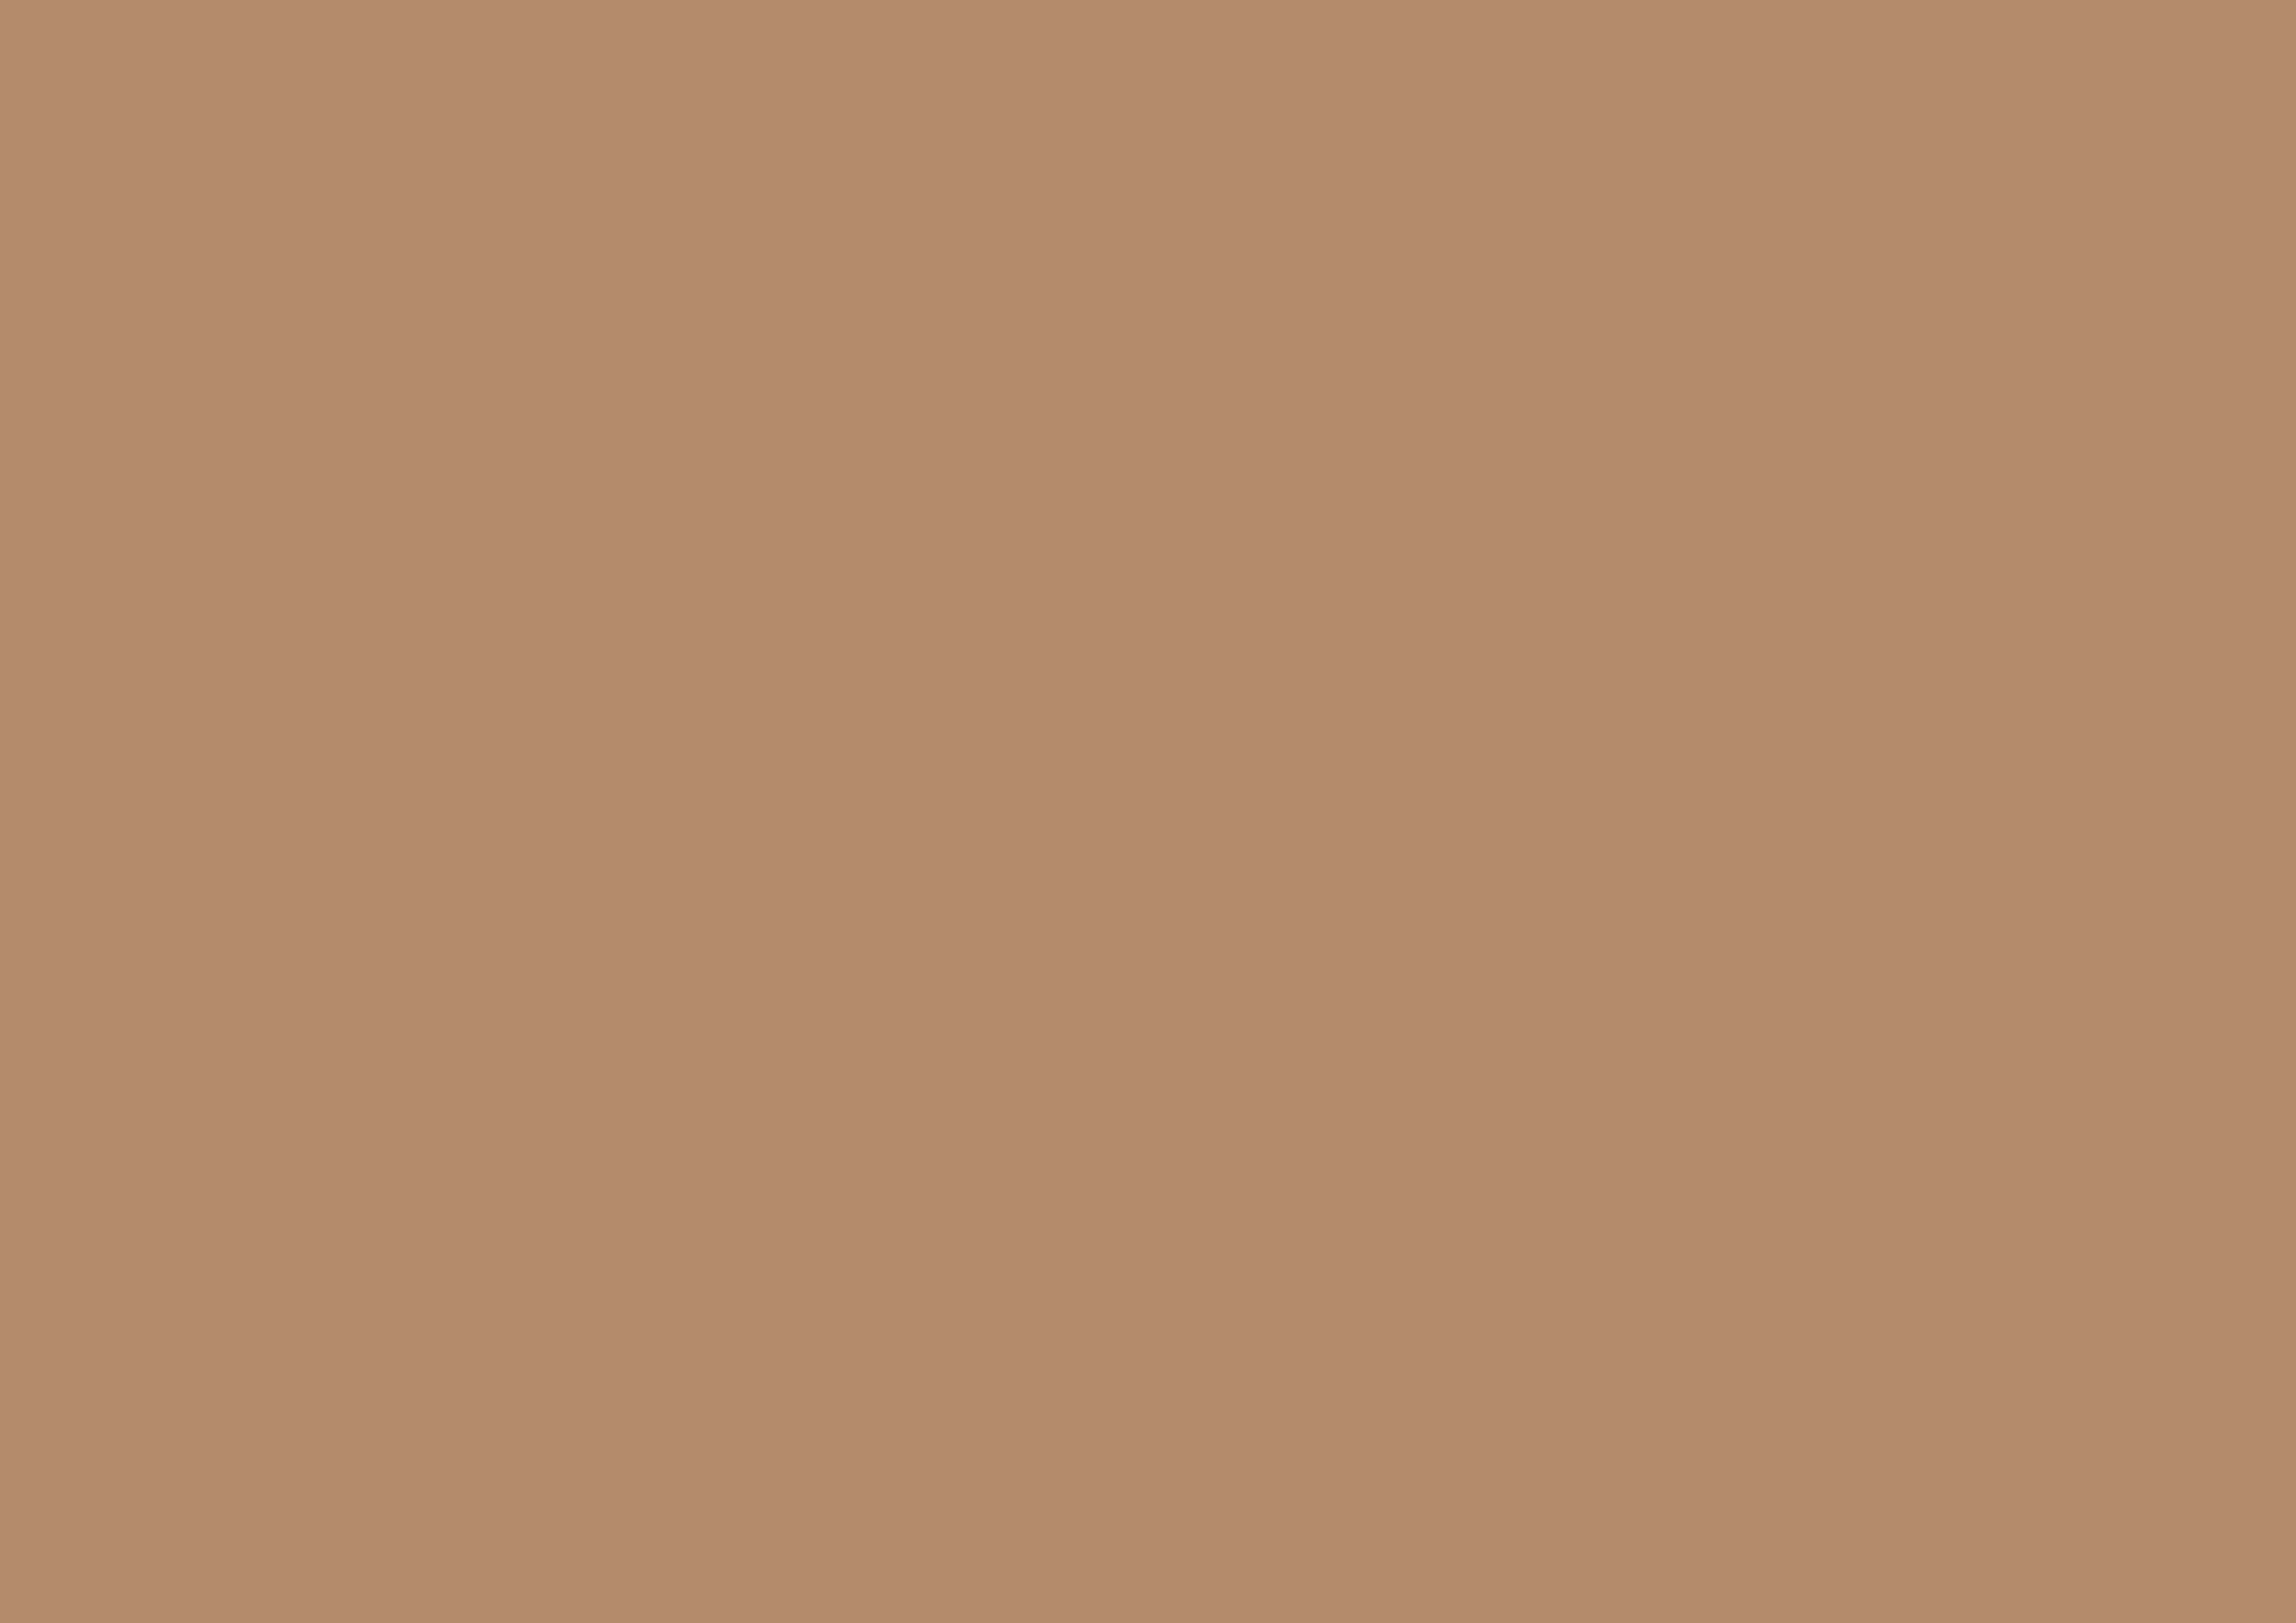 3508x2480 Light Taupe Solid Color Background